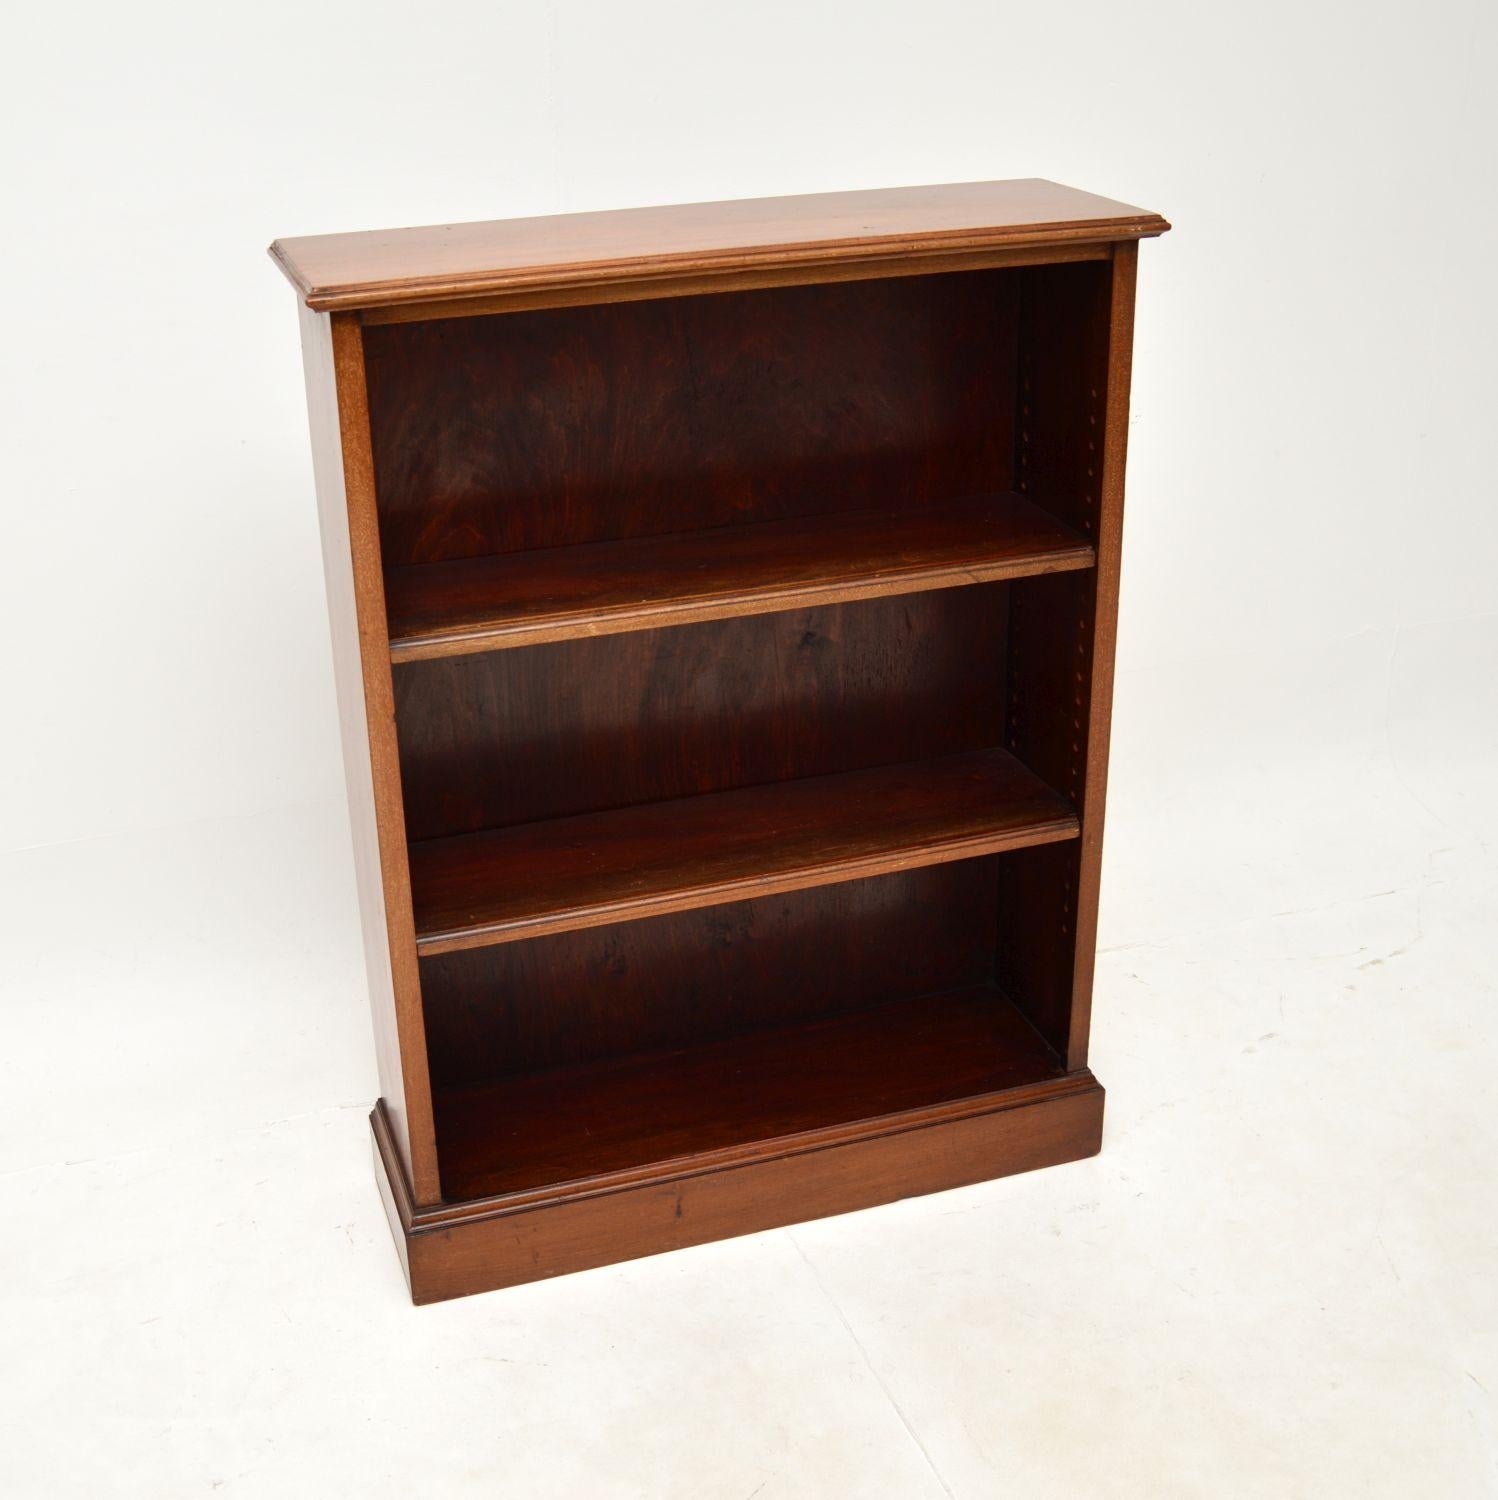 A smart and very well made antique open bookcase. This was made in England, it dates from around the 1920’s.

This is of superb quality and is a very useful size. It is fairly small and compact, yet offers plenty of storage space for books. The two